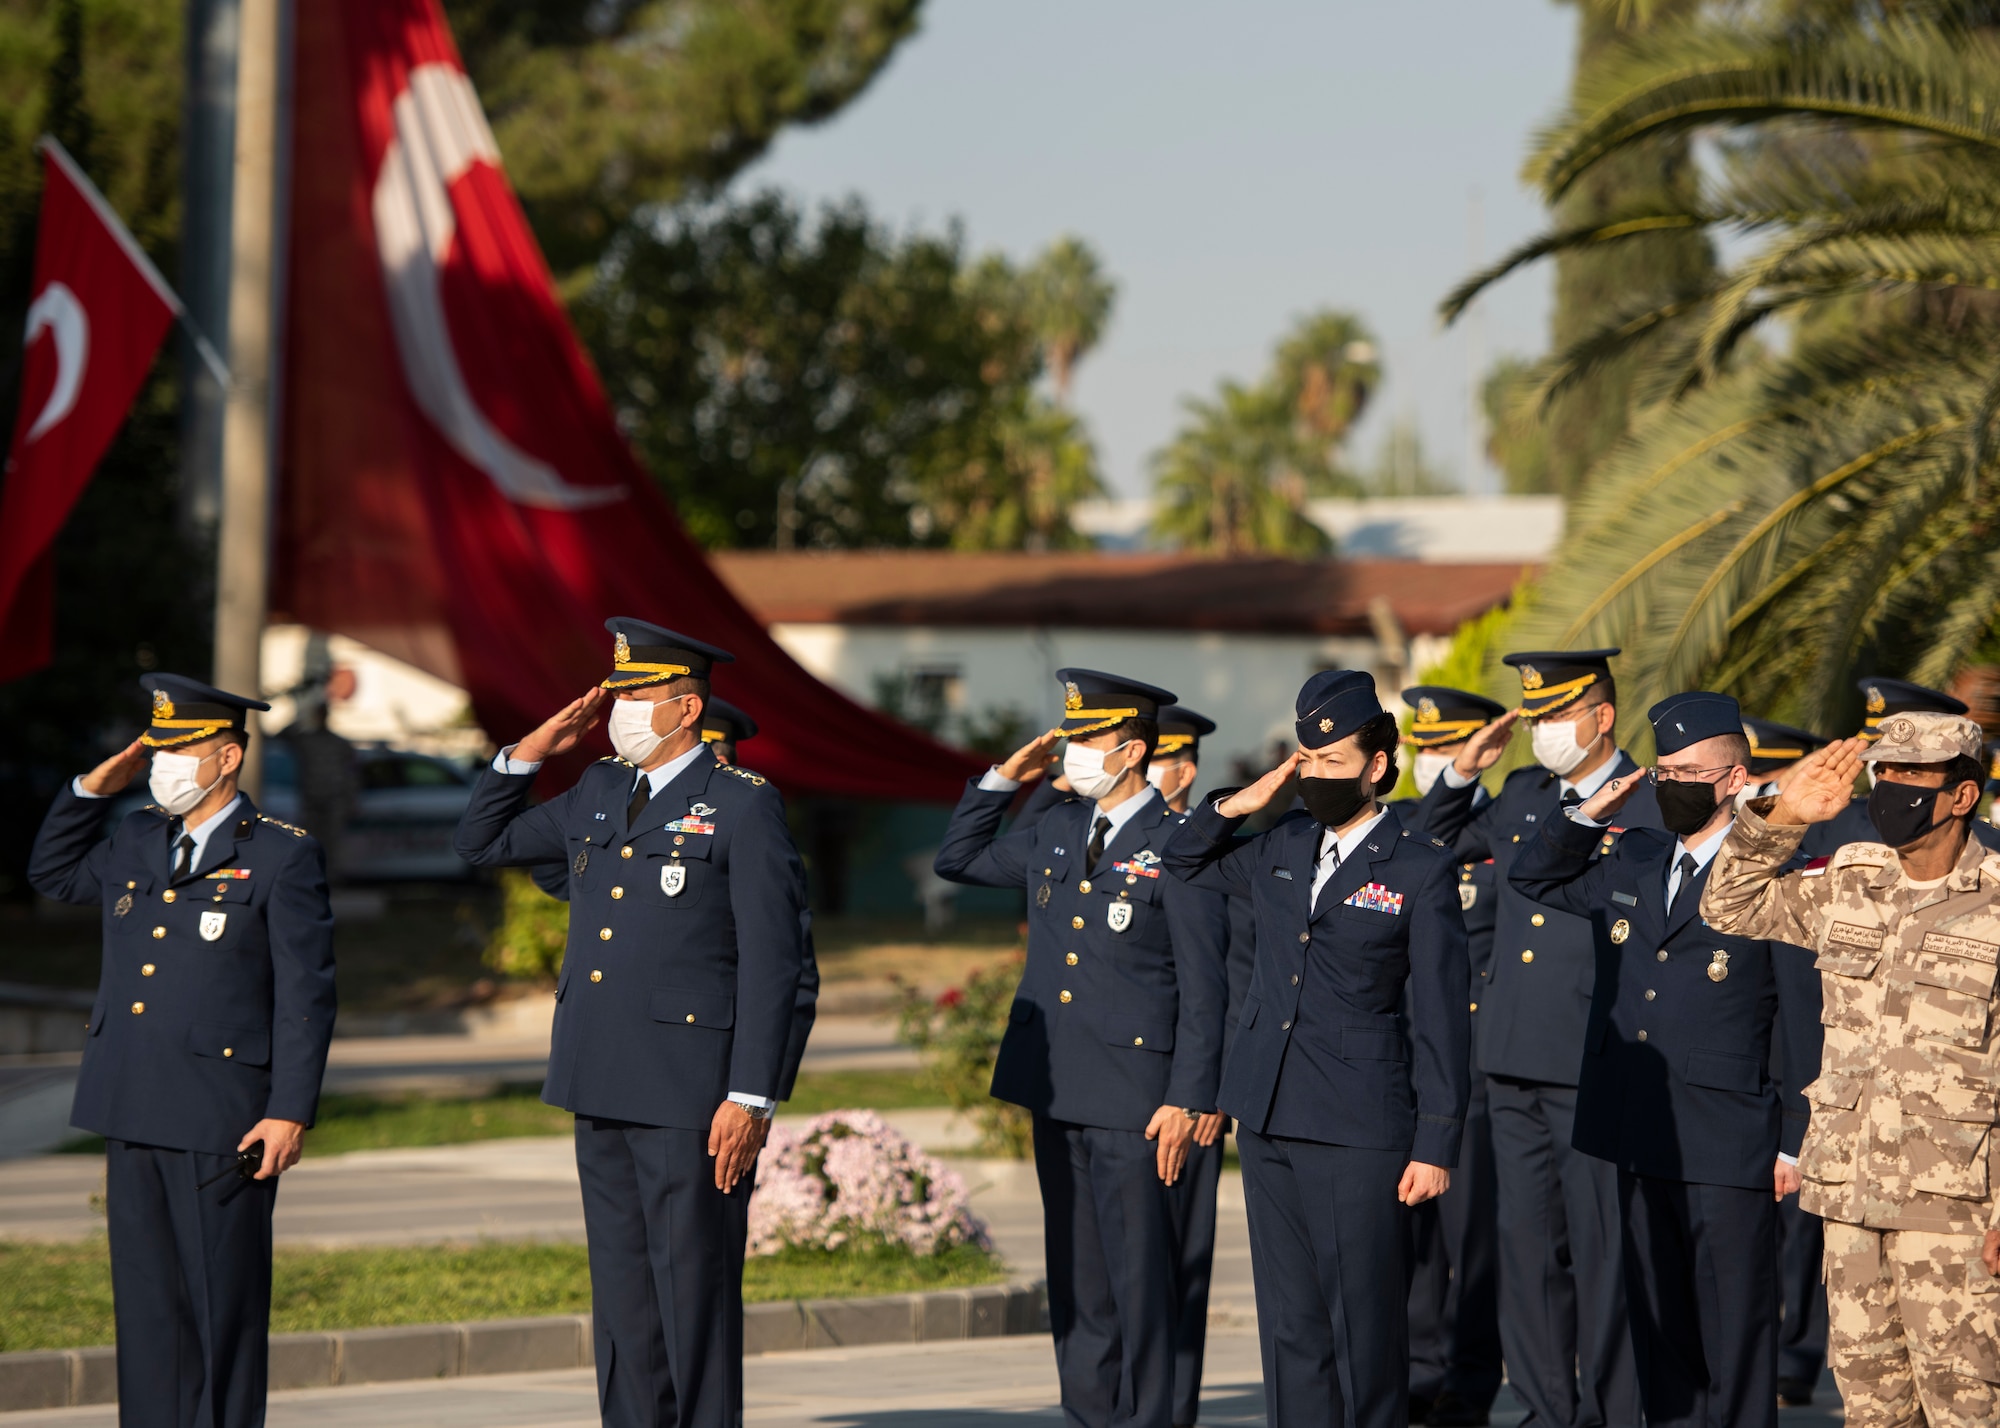 U.S. Air Force and Turkish Air Force personnel render a salute during a ceremony.